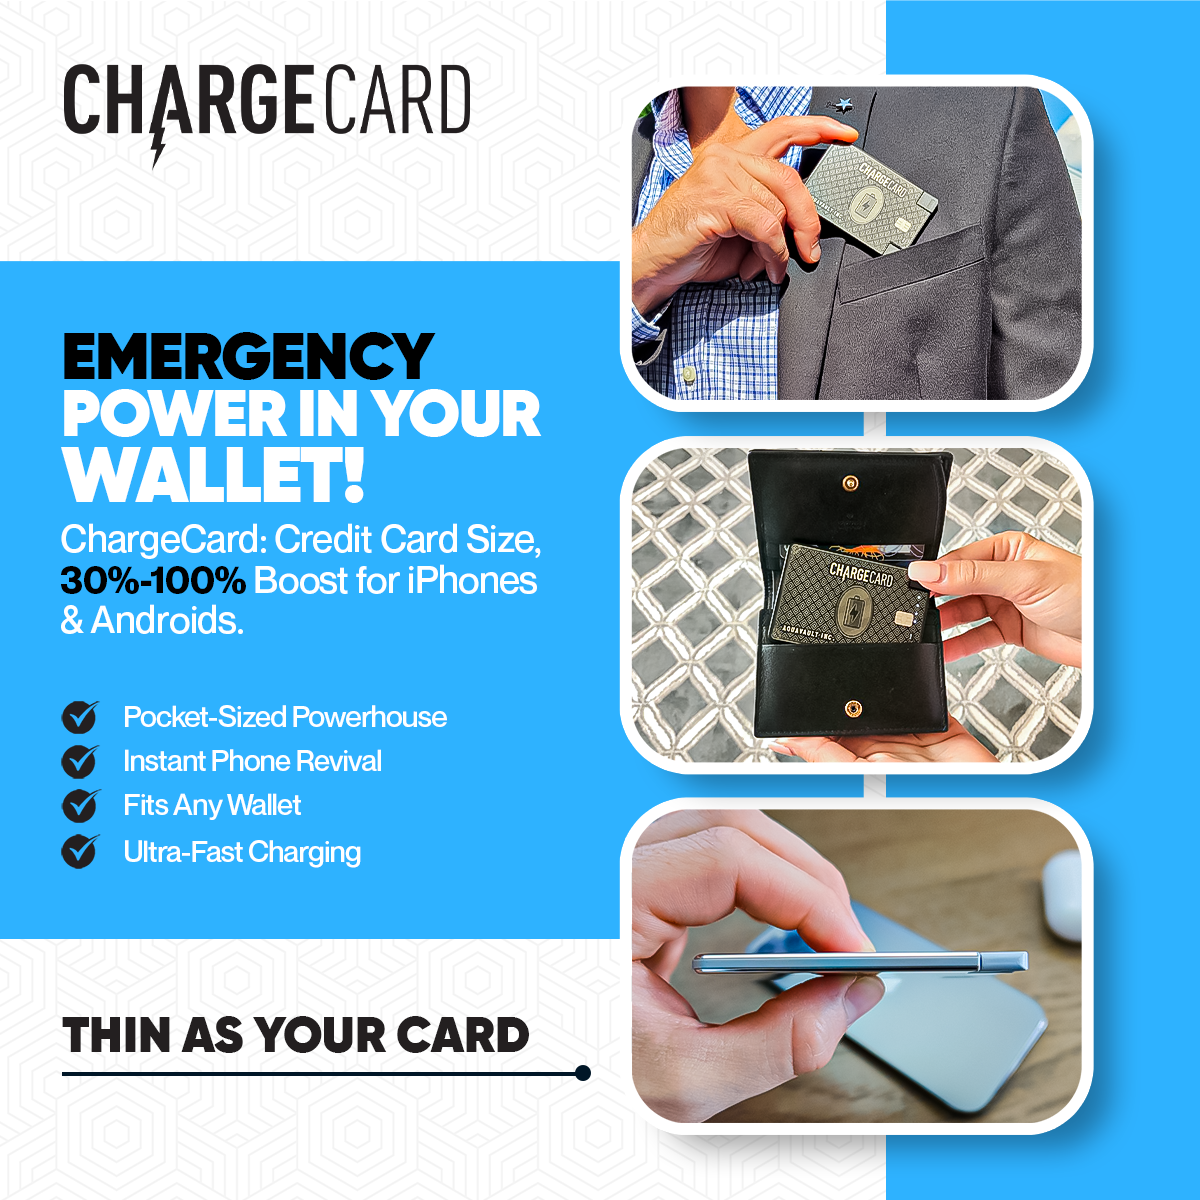 The World's Thinnest Portable Charger - The ChargeCard®